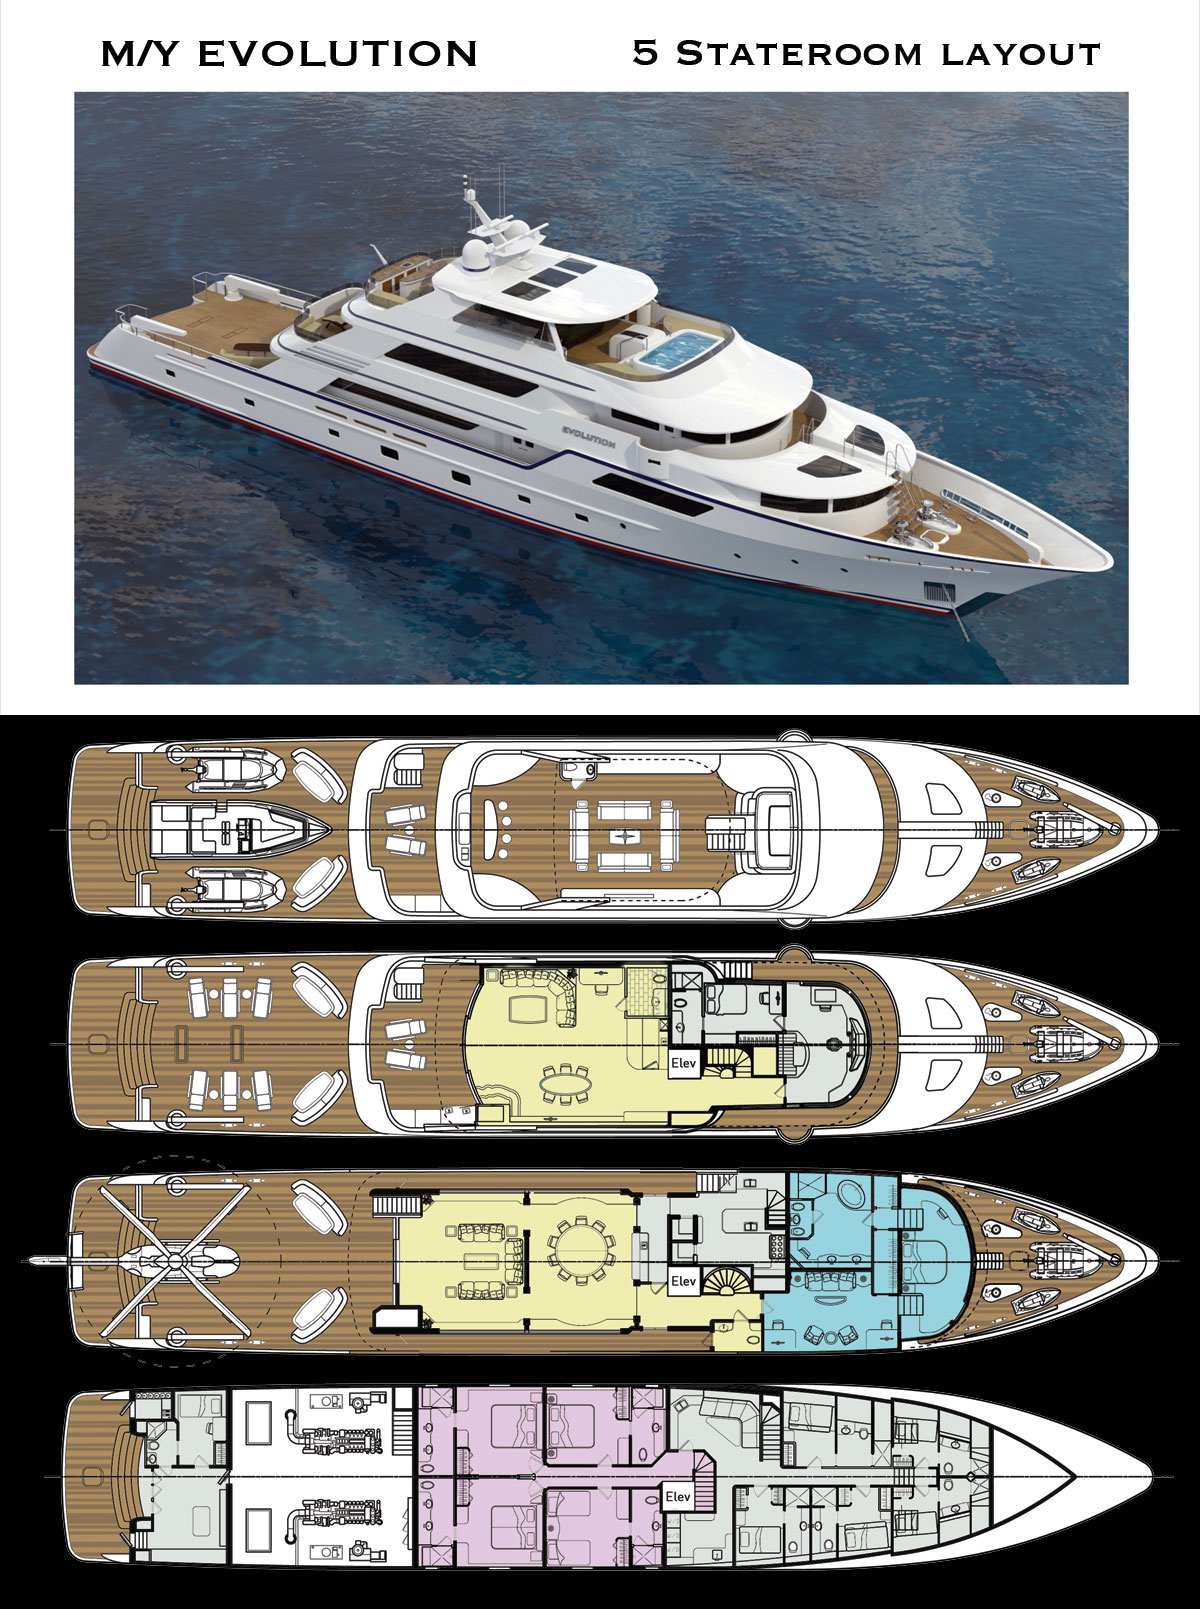 Deck Layout for 50 Meter Luxury Explorer Yacht with 5 Staterooms